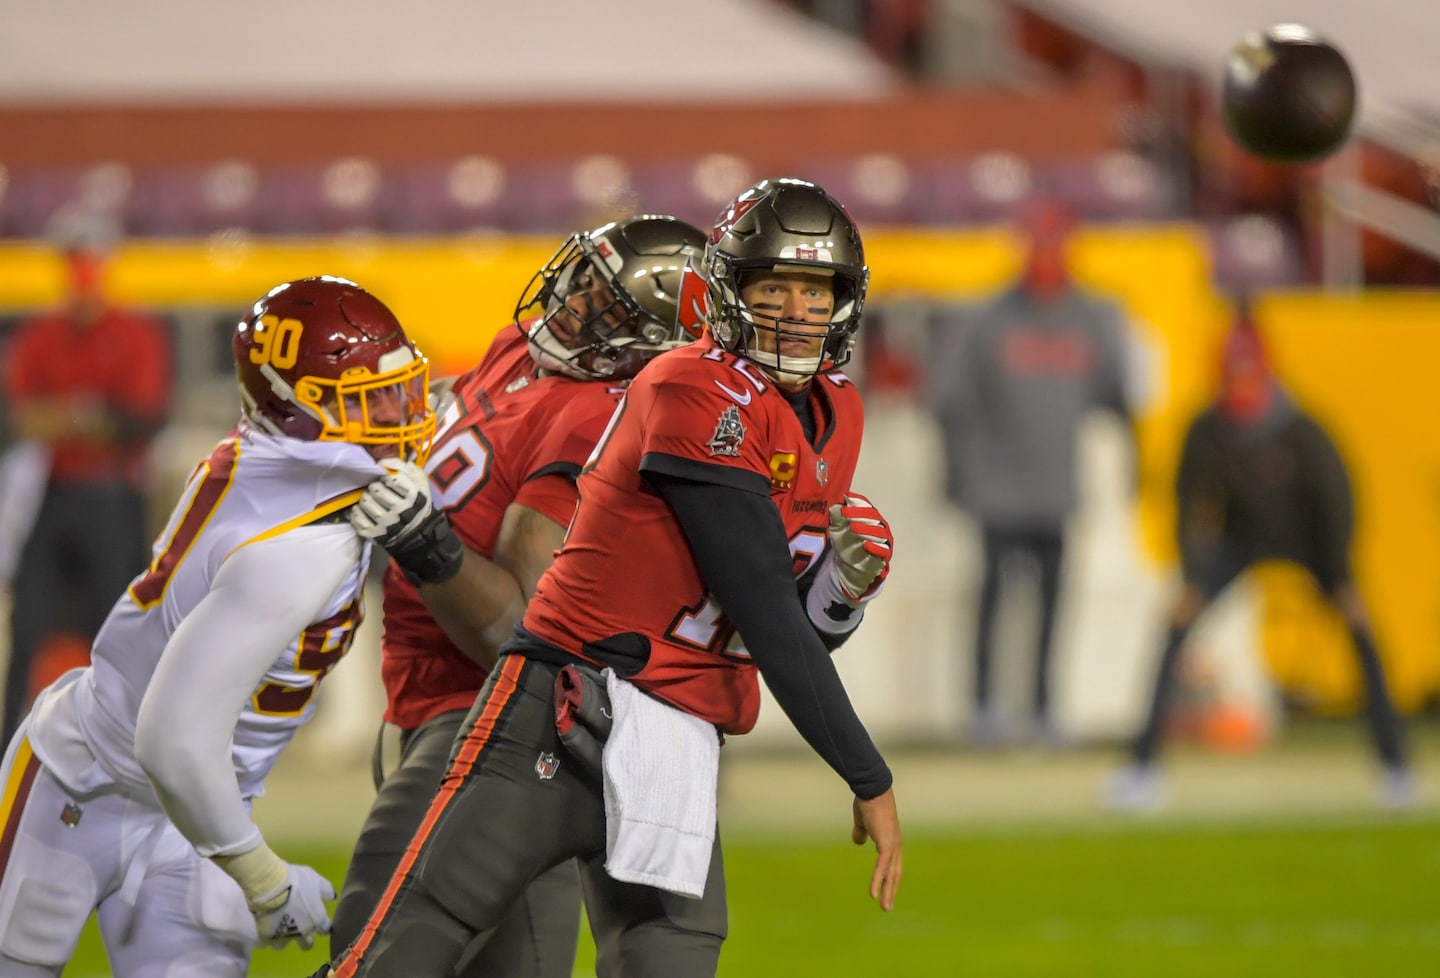  Four takeaways from Washington’s playoff loss to Buccaneers 